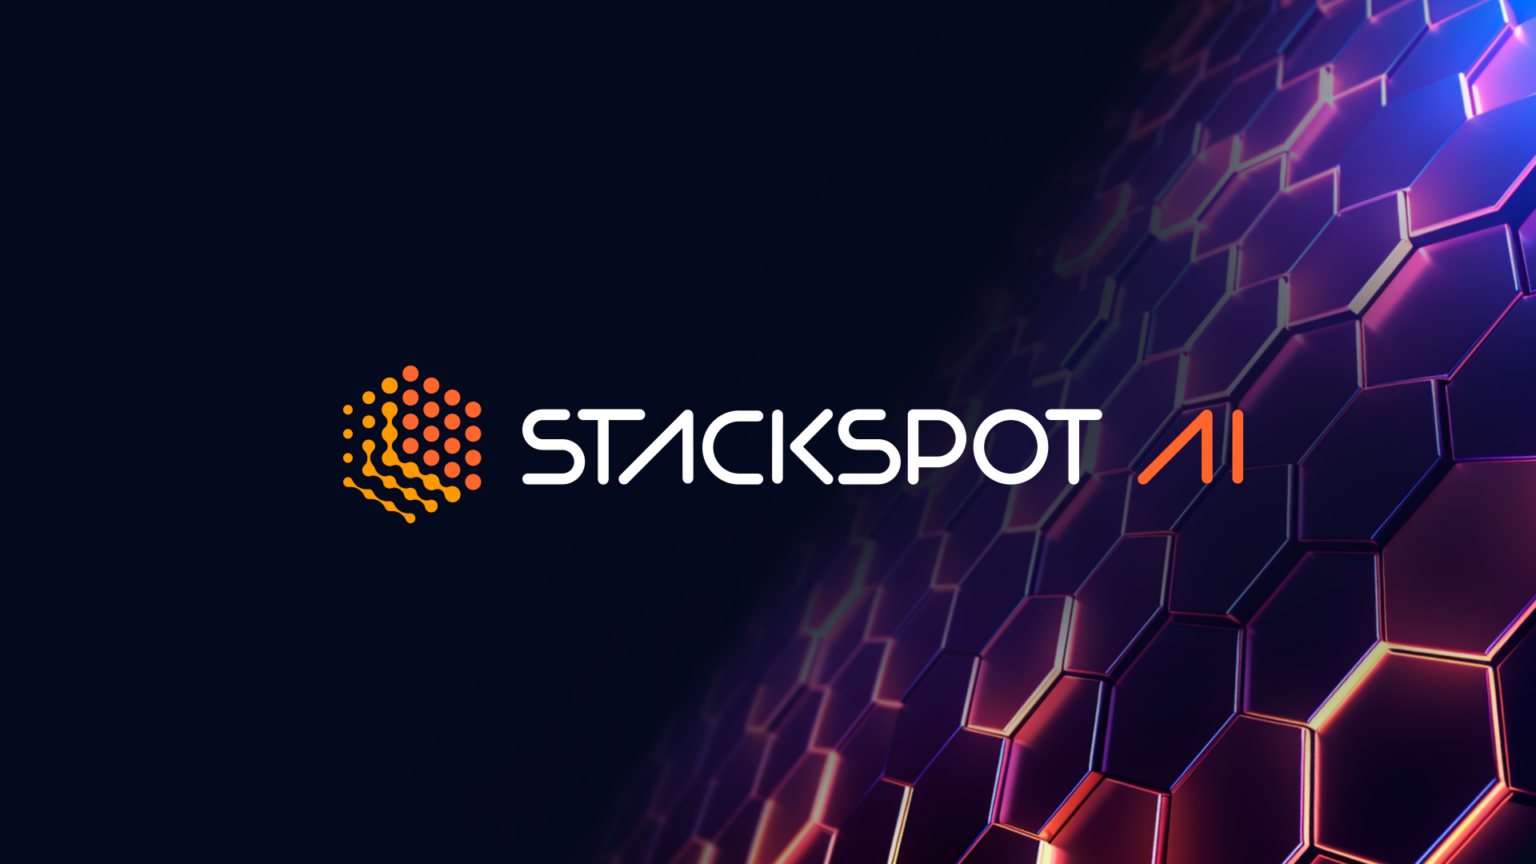 Cover image for StackSpot AI tutorial A Context-Aware Code Assistant, featuring a hive-like structure with "StackSpot AI" written on it.